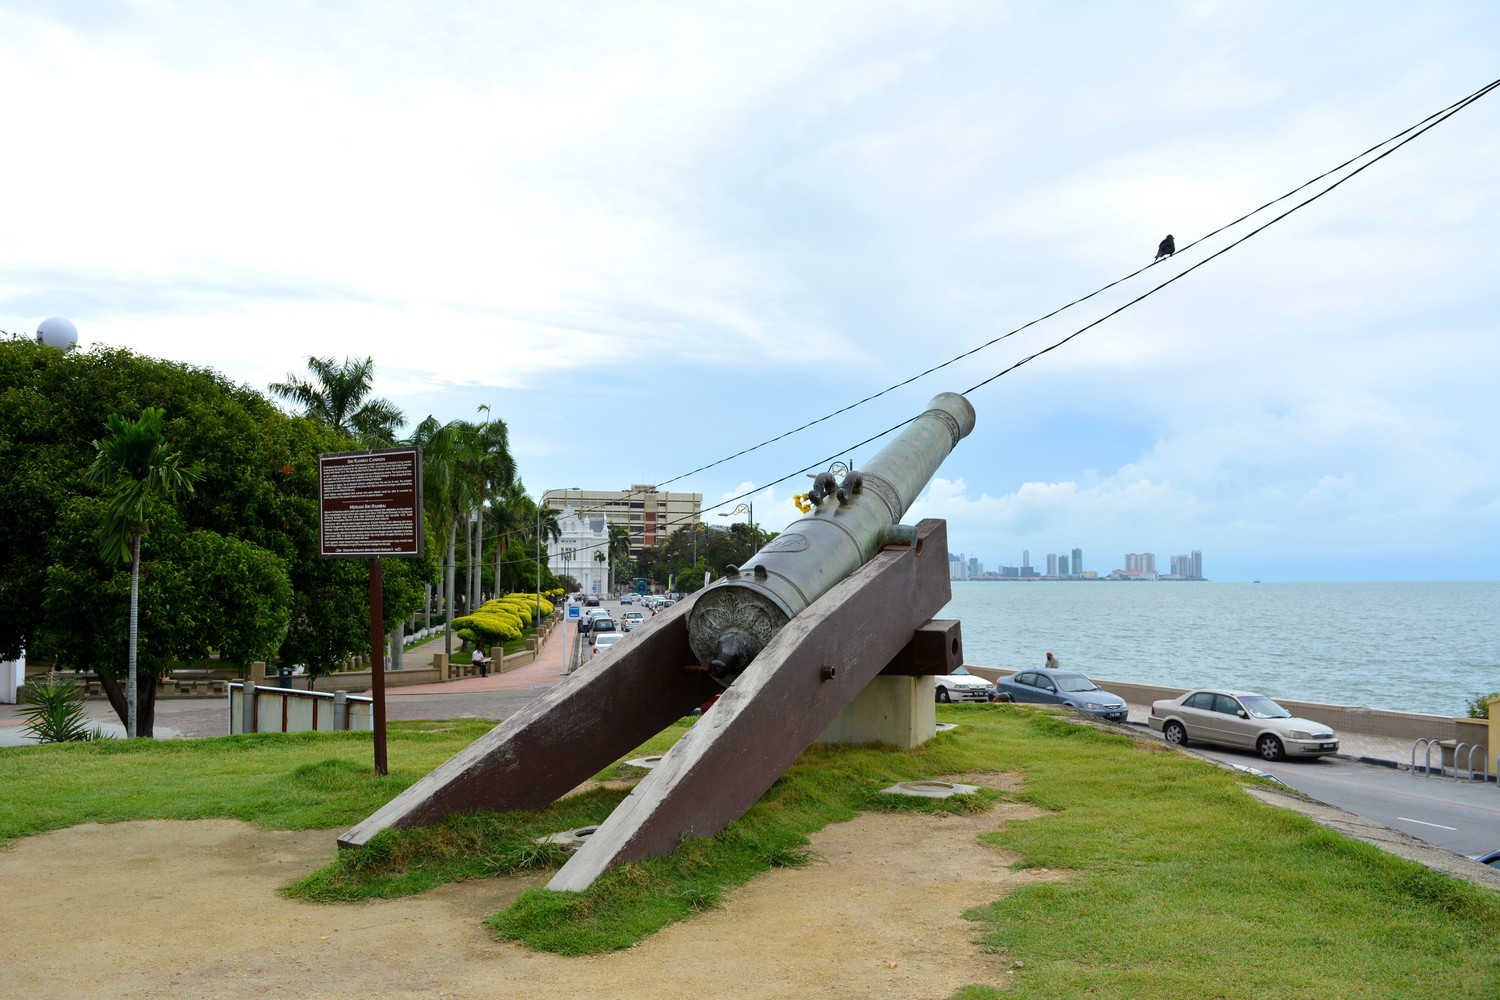 A cannon at a corner of a fort overlooking a street in front of it and the surrounding sea